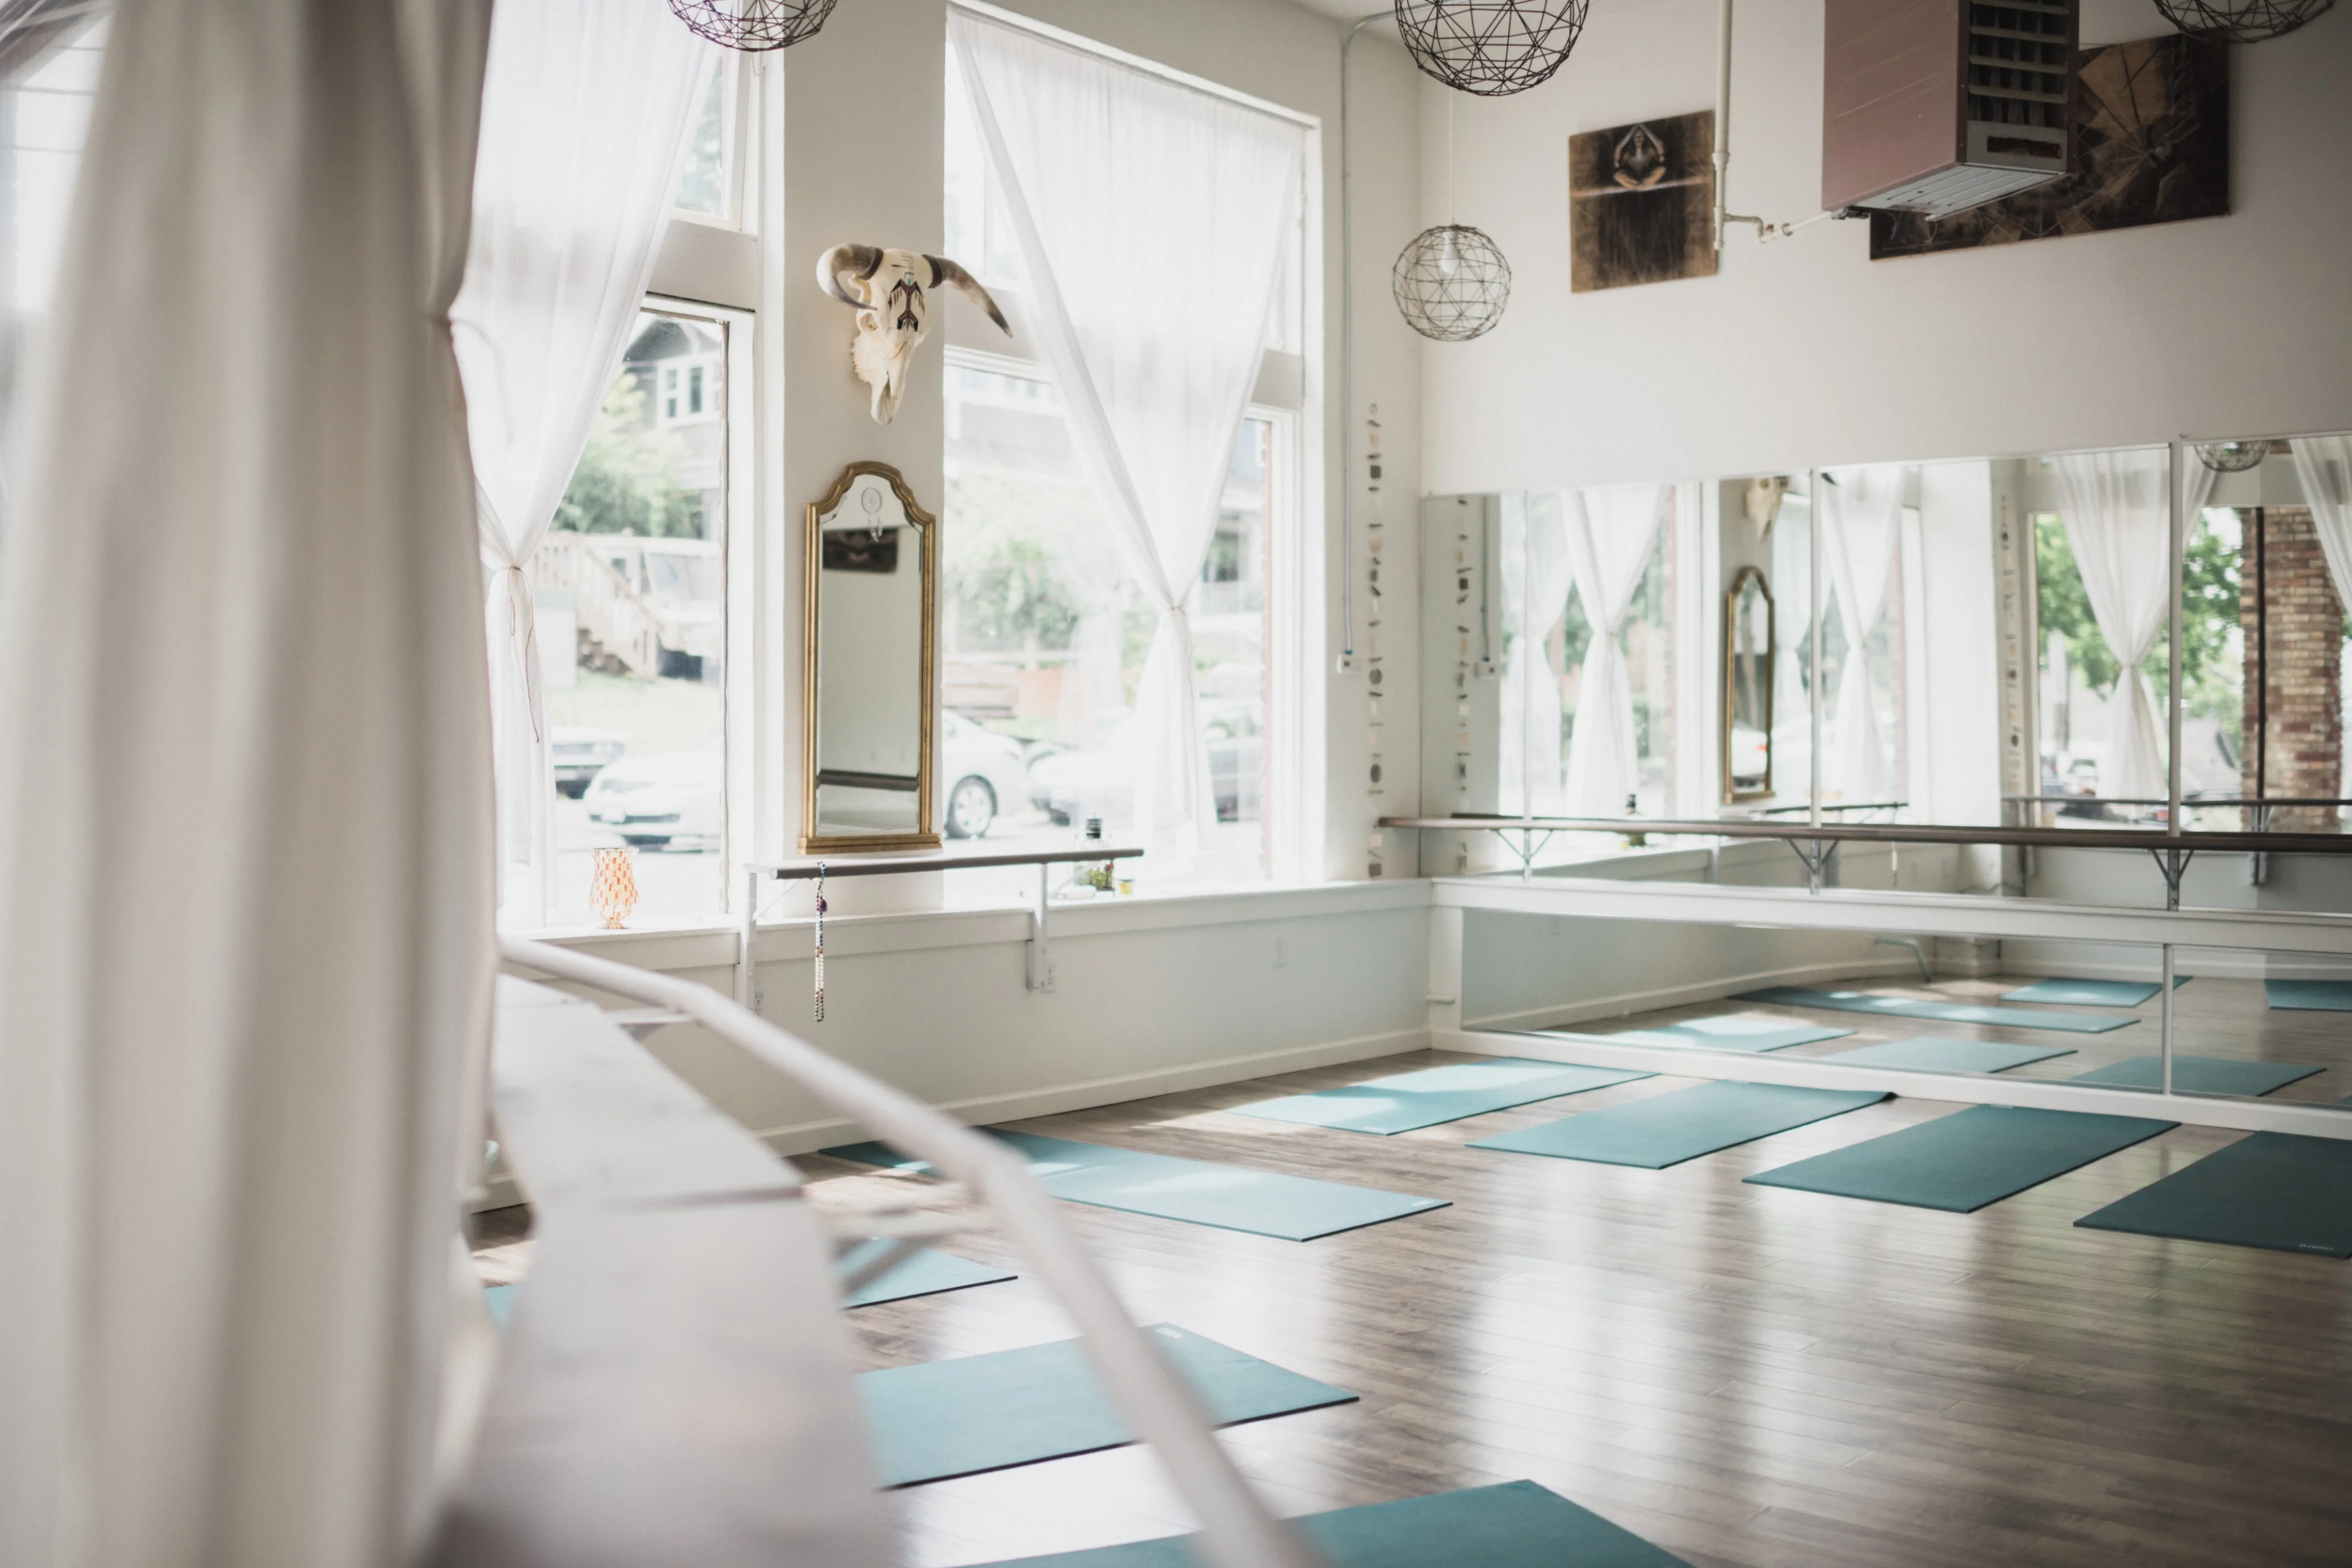 Yoga Studio Rental For Events - What You Need To Know